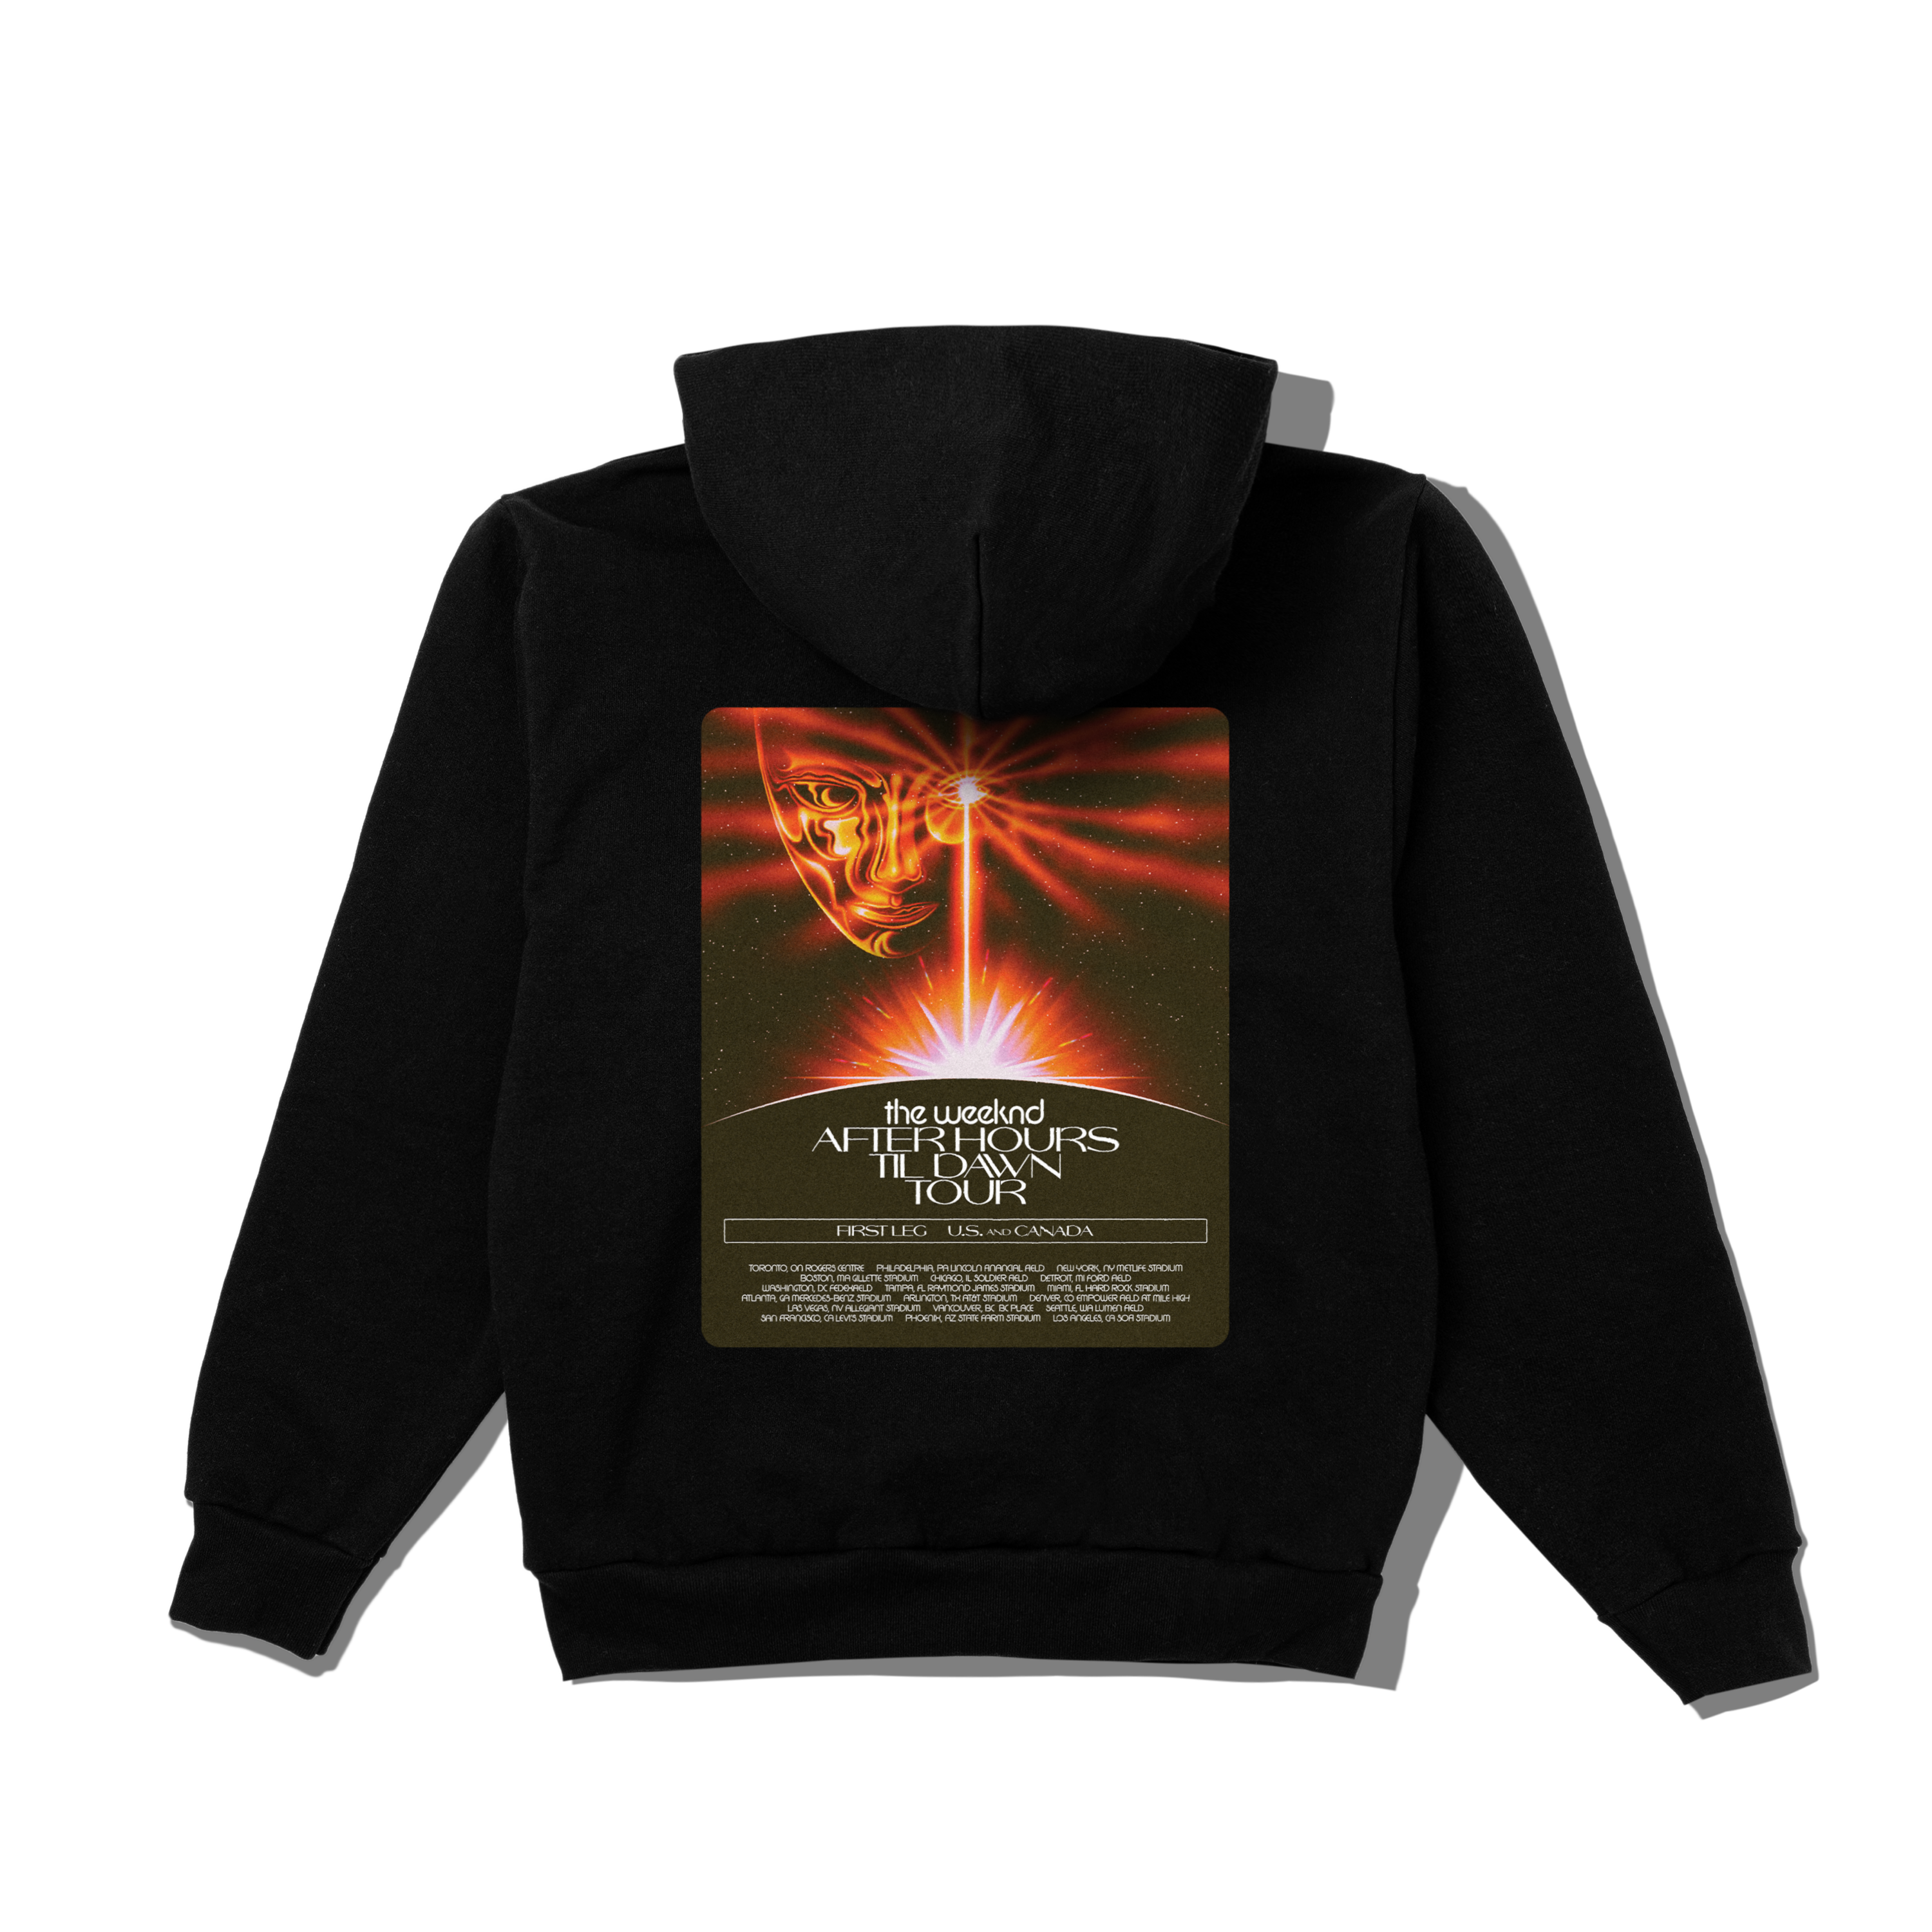 AHTD TOUR MERCH PRODUCT SHOTS POSTER HOODIE BACK 1 - The Weeknd Store